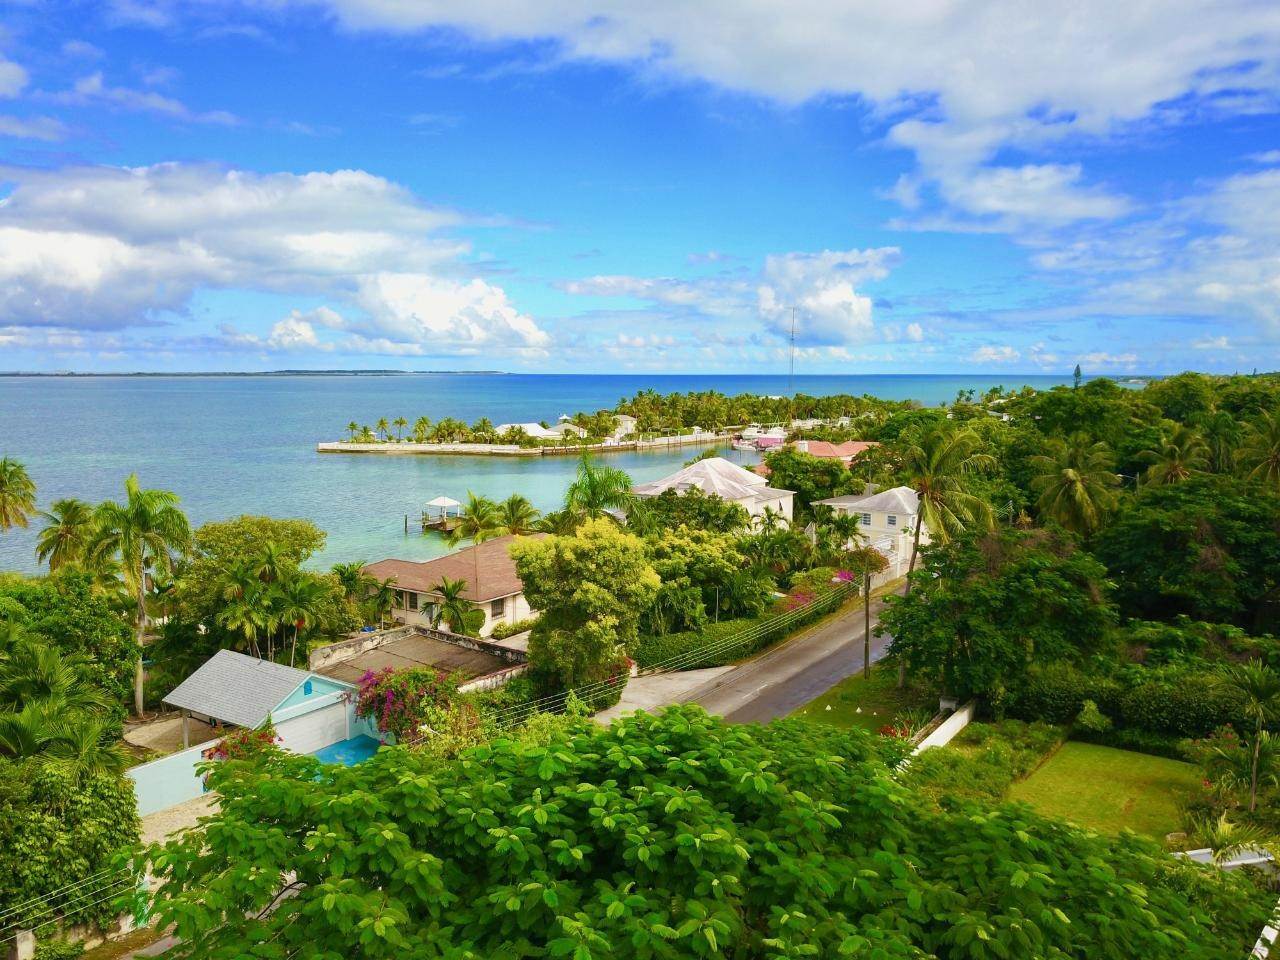 10. Lots / Acreage for Sale at Mount Vernon, Eastern Road, Nassau and Paradise Island, Bahamas